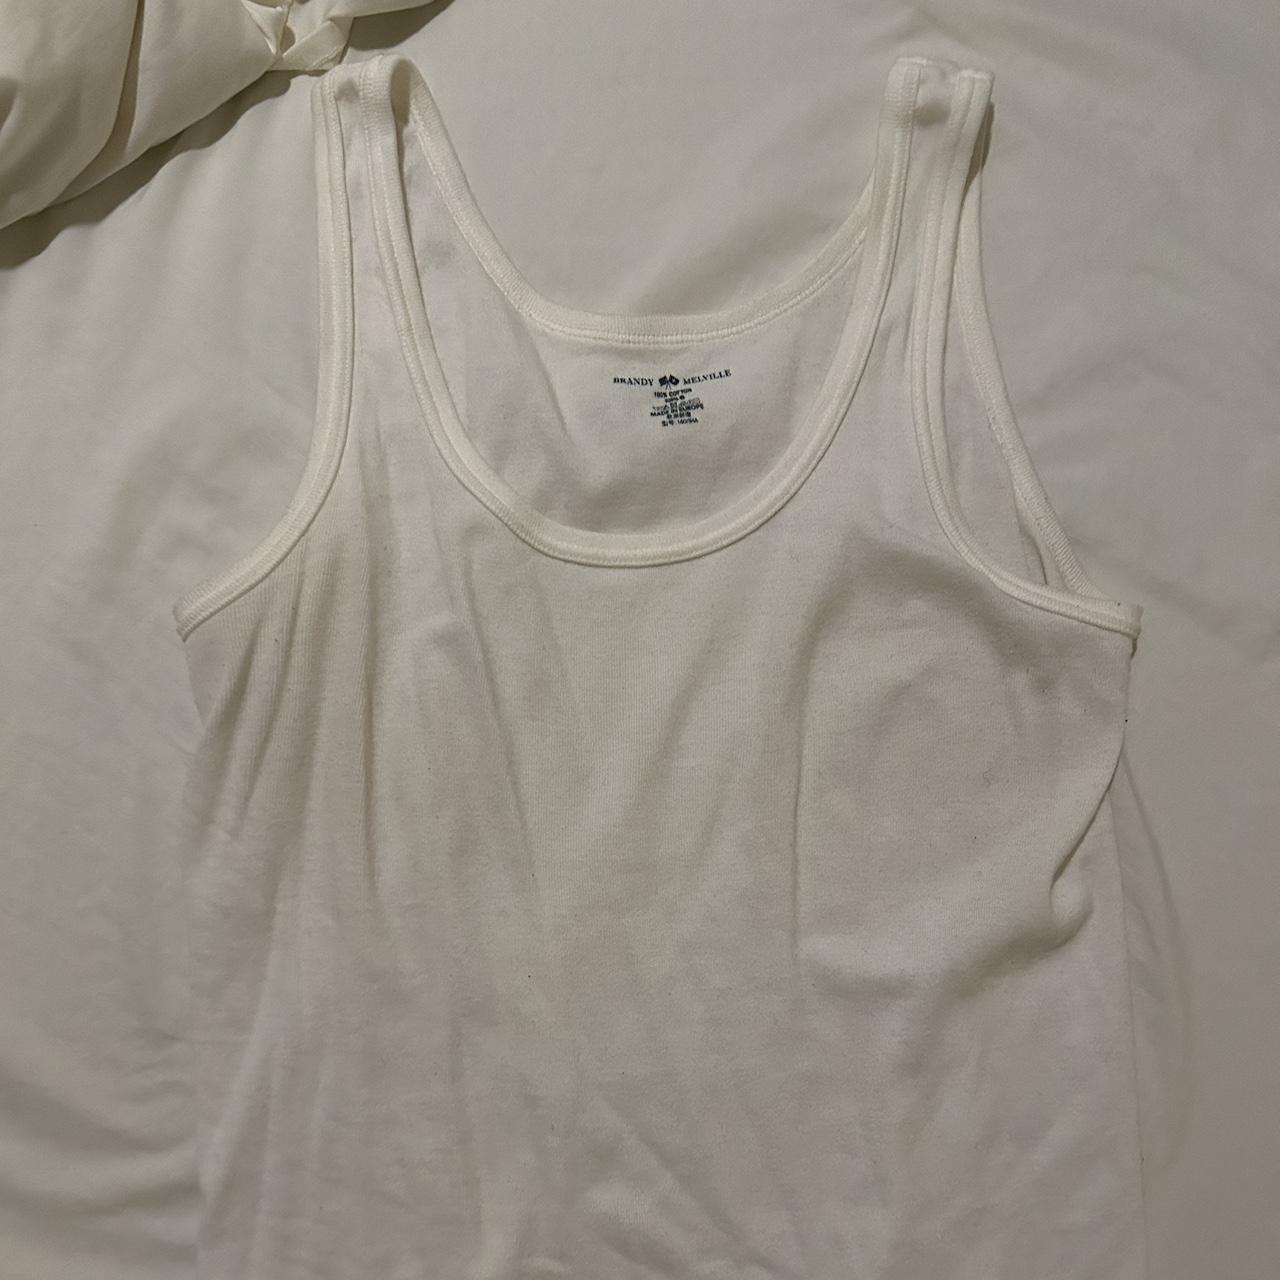 Brandy Melville White sheena tank Size undefined - $22 New With Tags - From  Kimberly